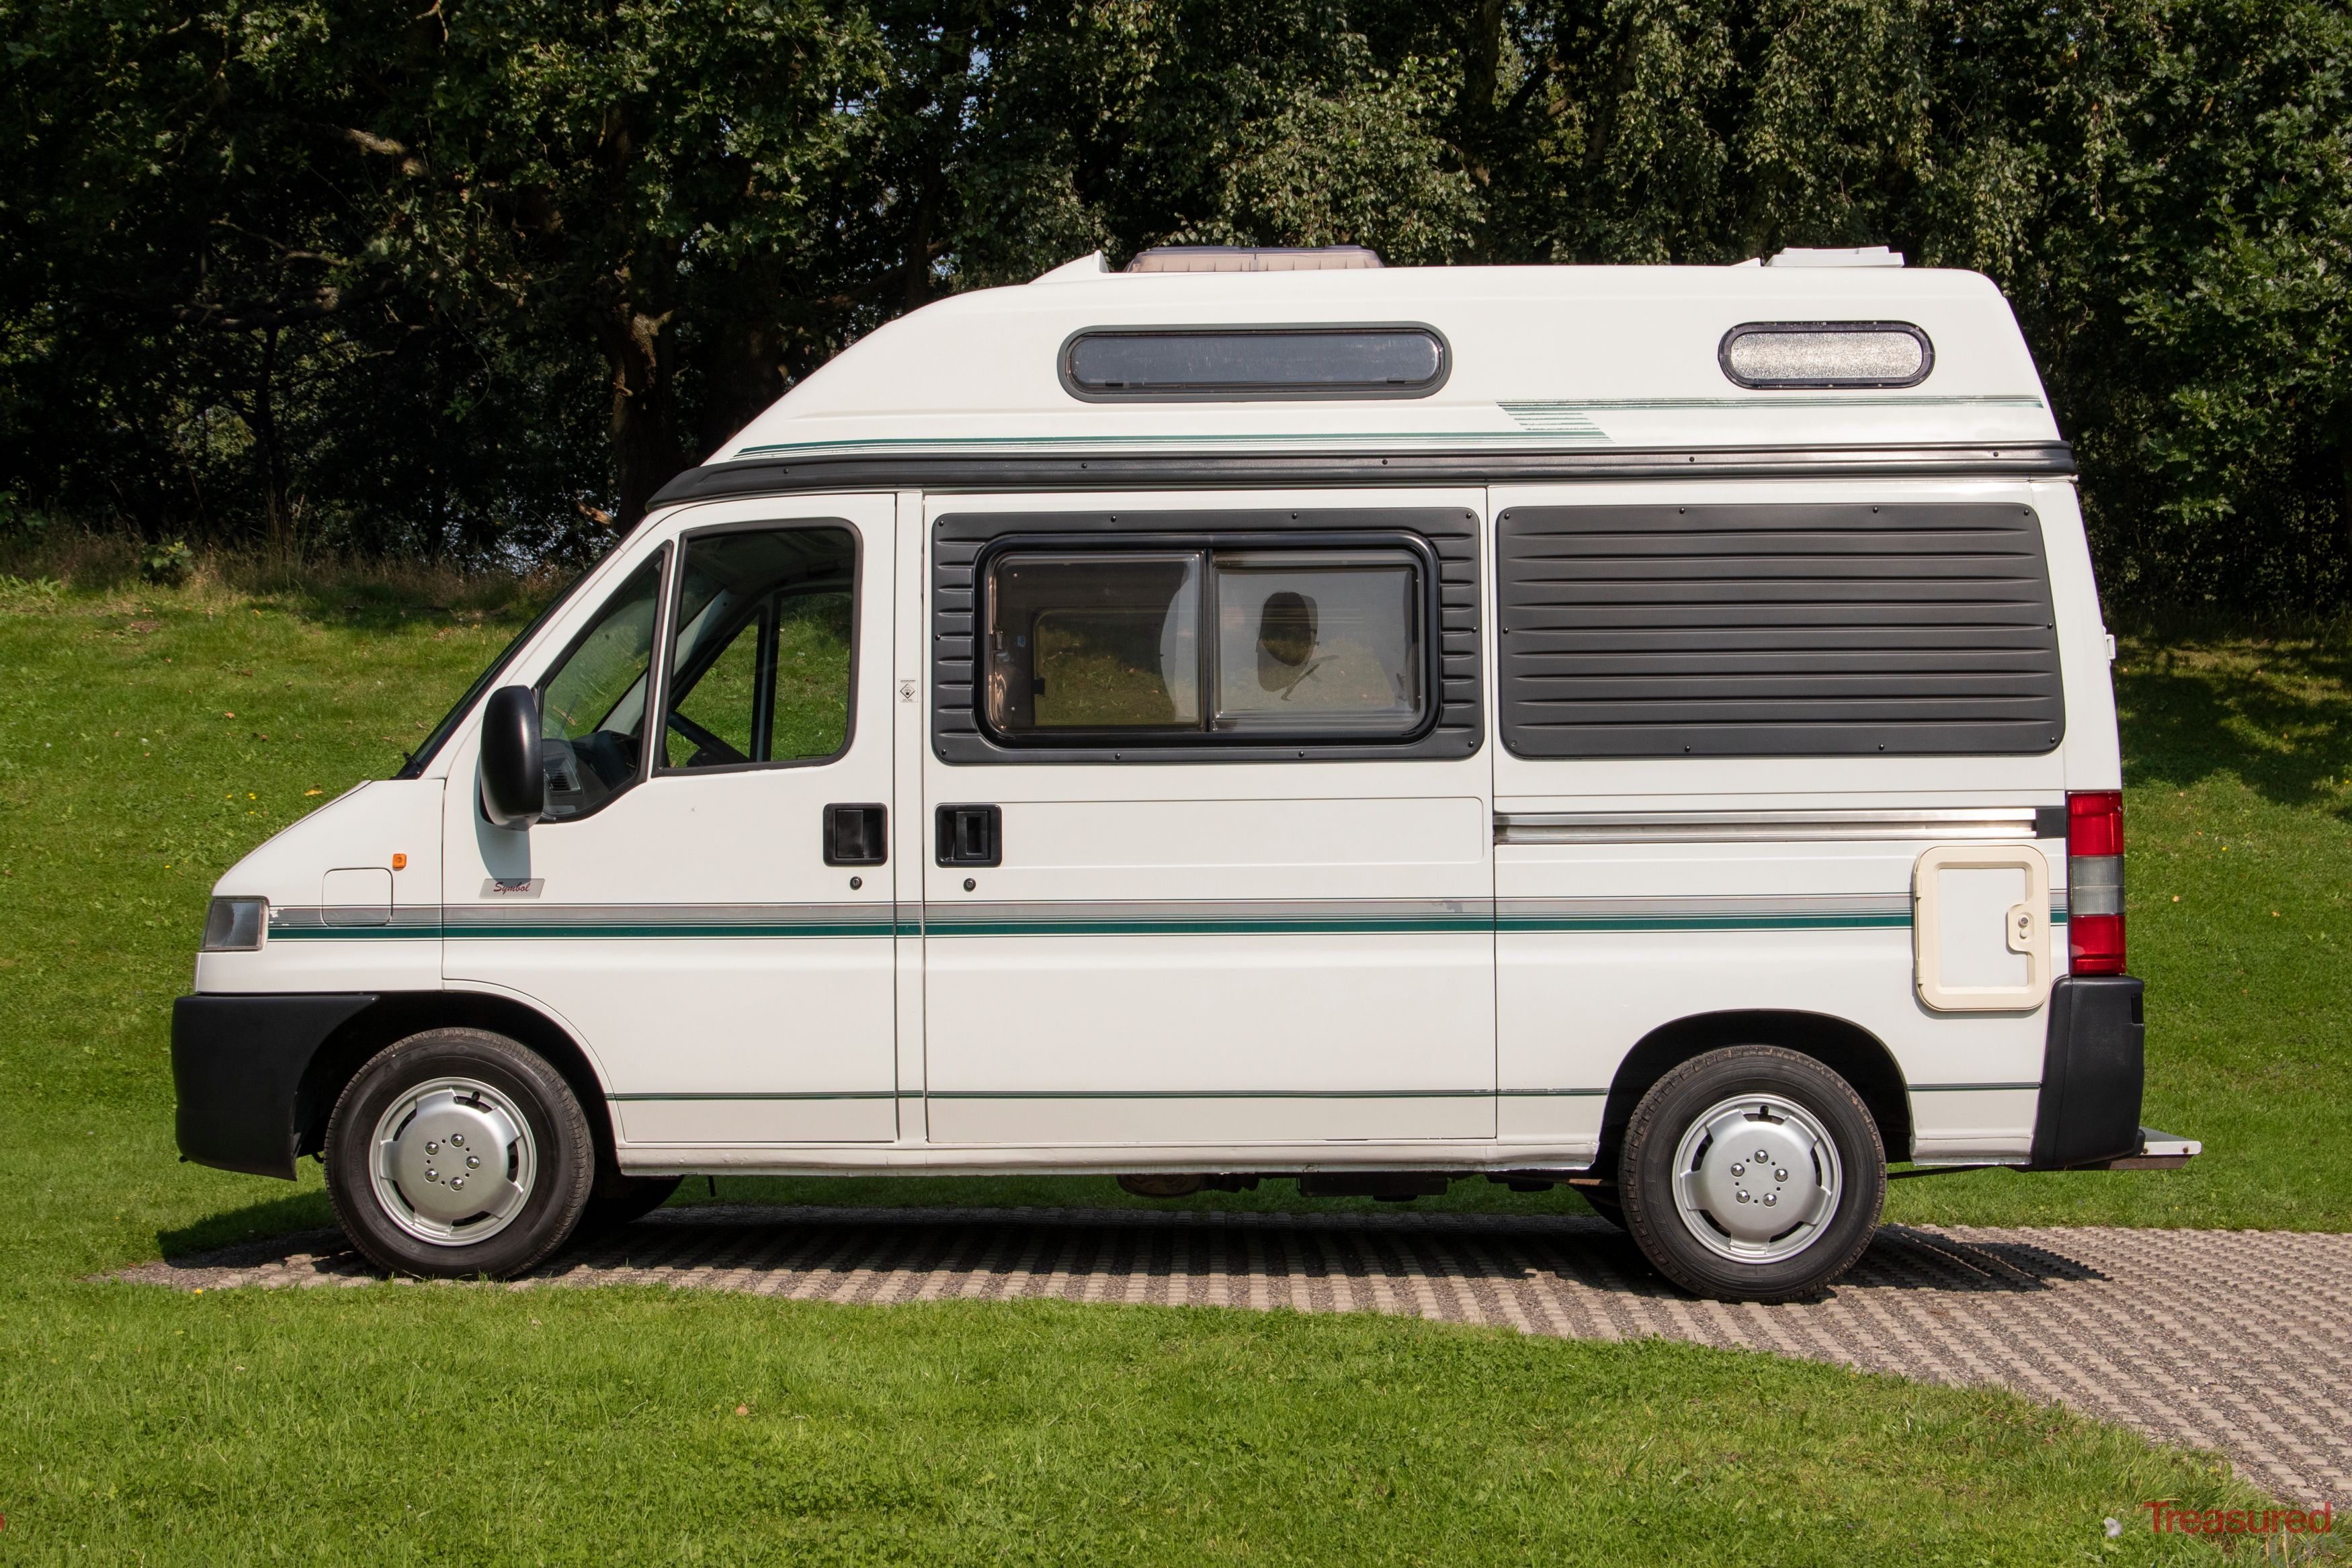 Peugeot Boxer motorhome punches above its weight as a light, compact second  home on wheels